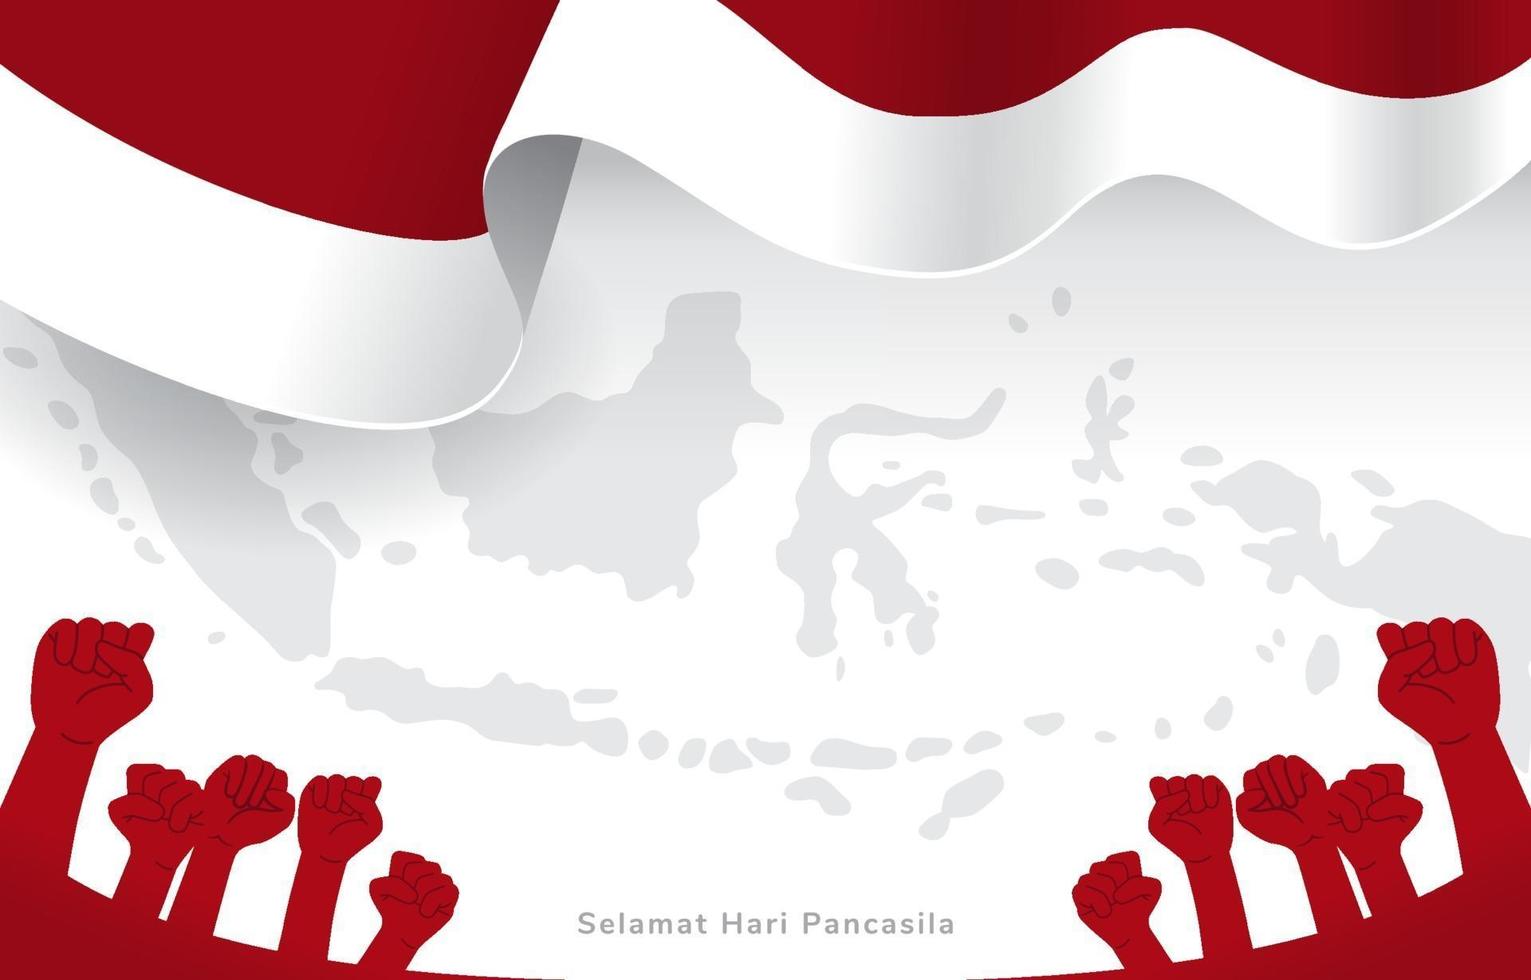 Indonesian Celebrating Pancasila Day with Indonesia Map and Flag Background vector